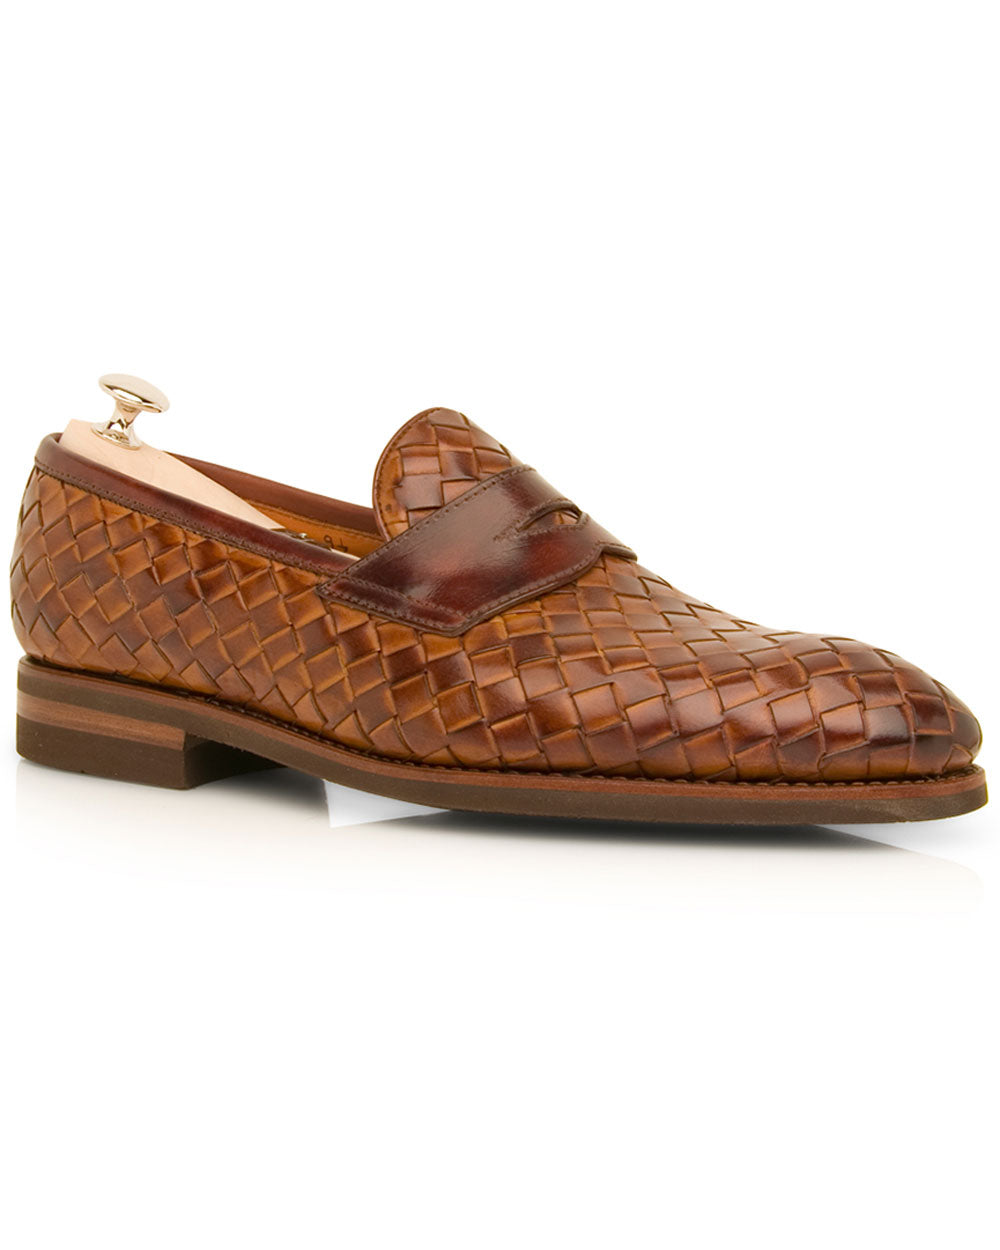 Woven Penny Loafer in Cognac